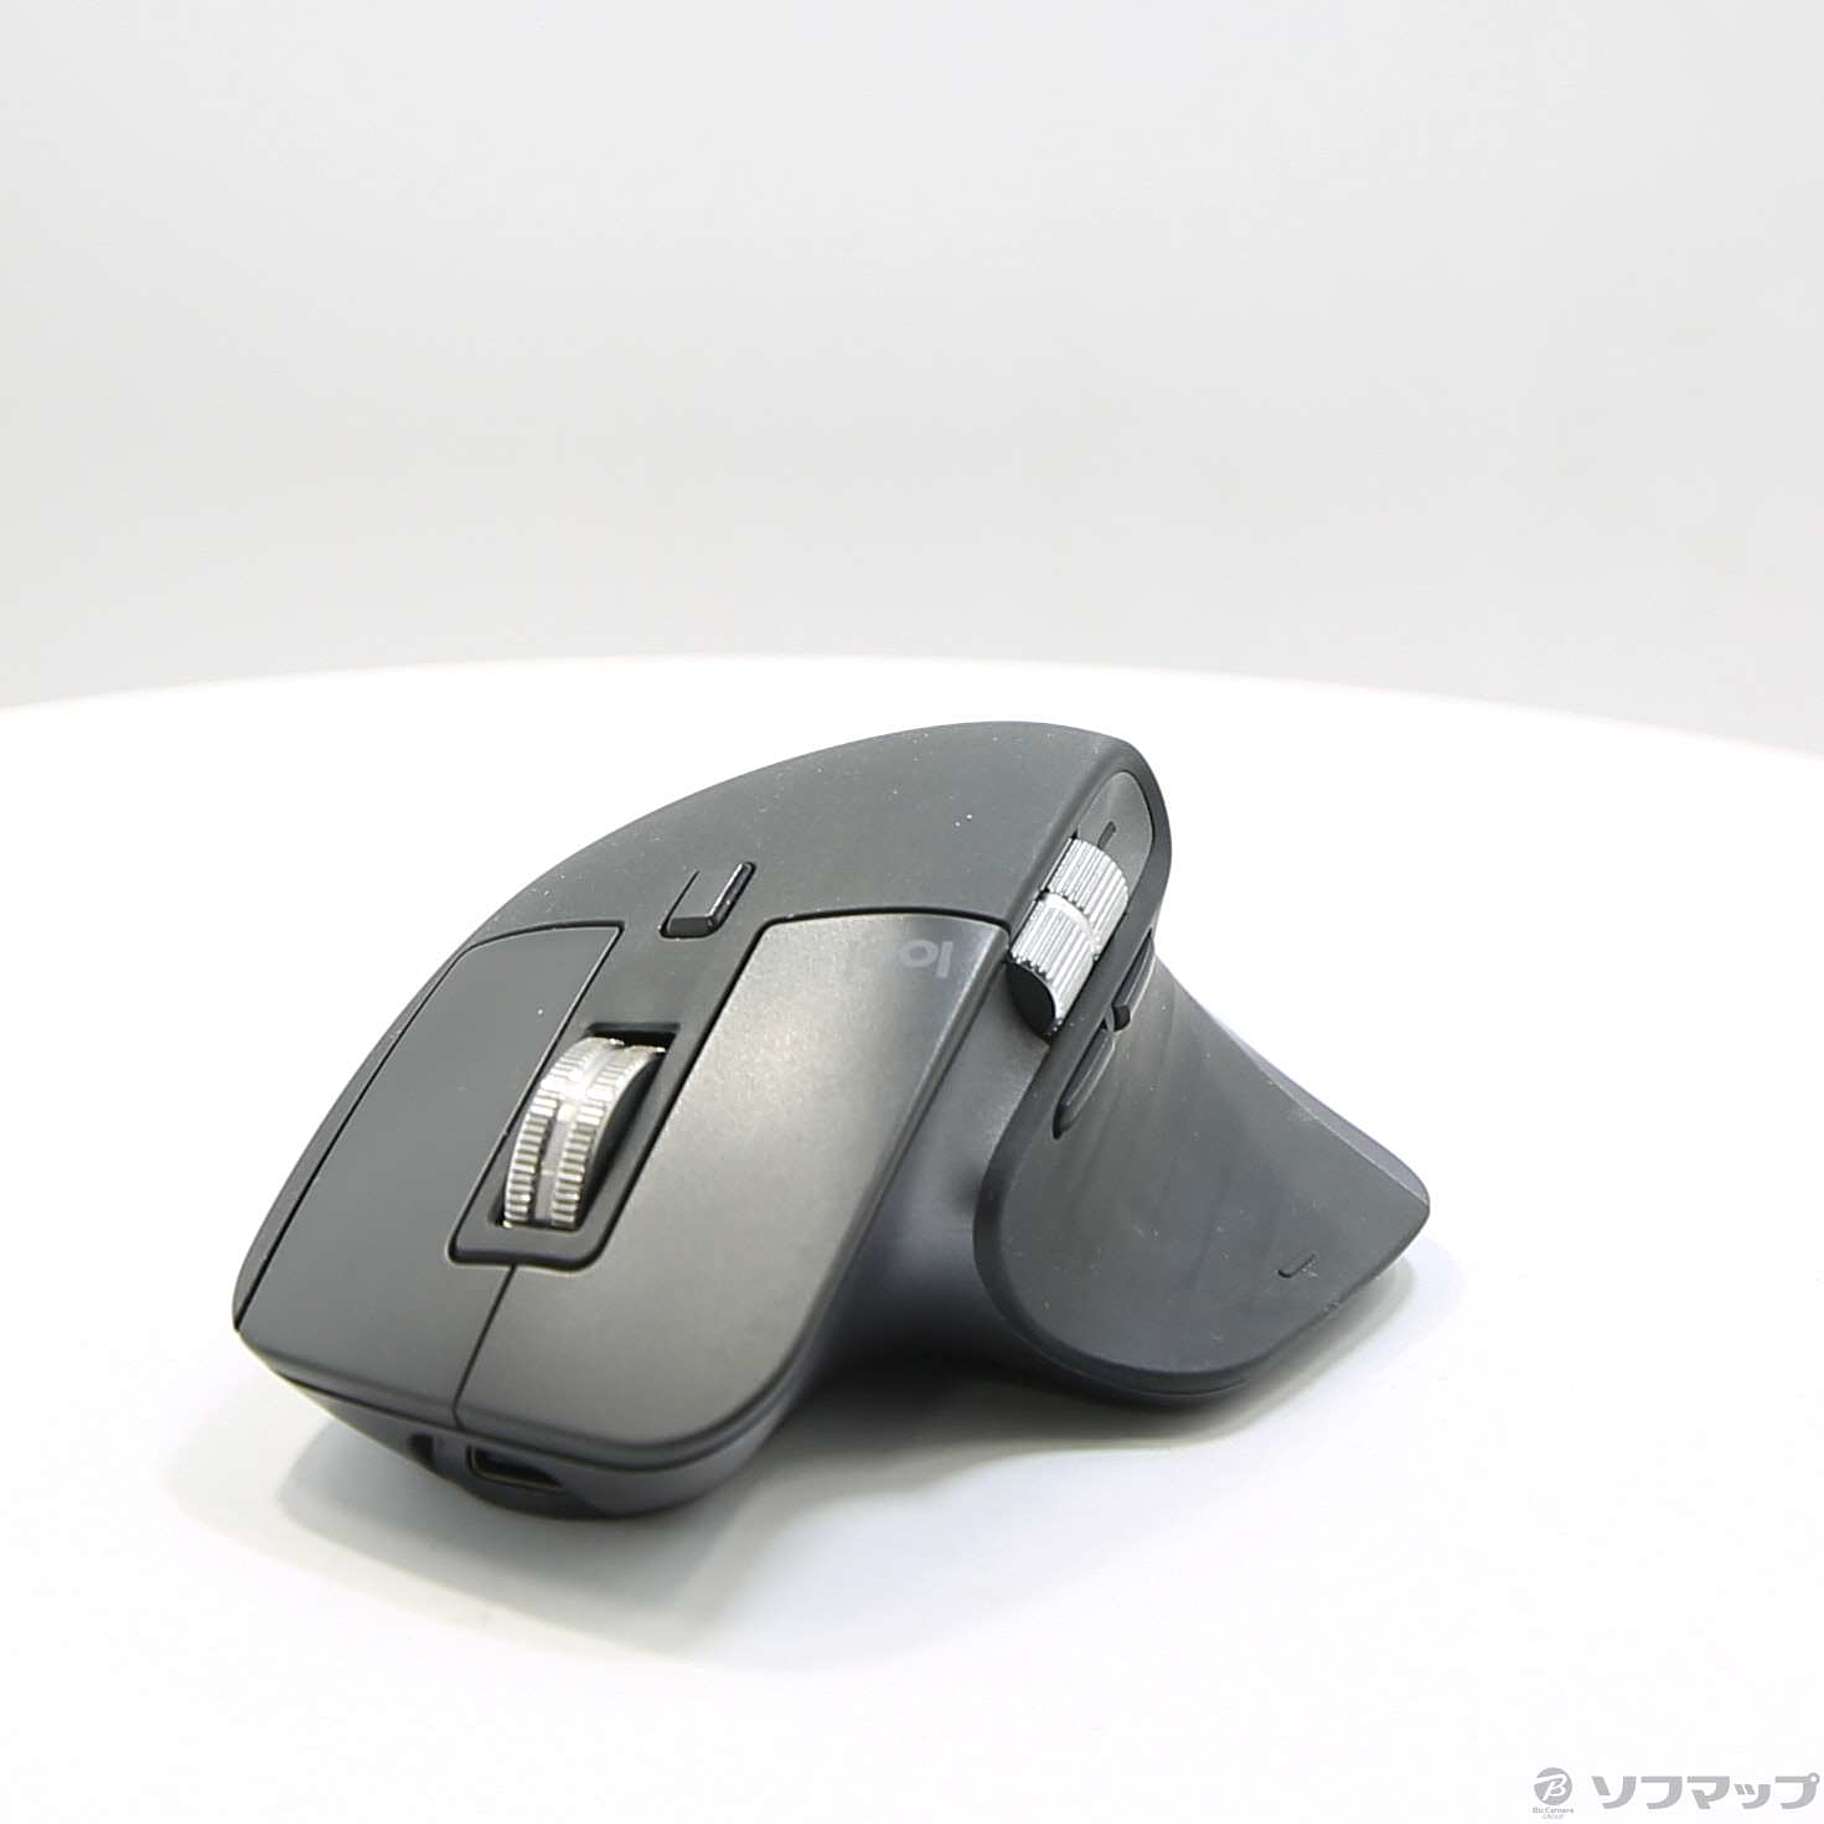 MX Master 3 Advanced Wireless Mouse MX2200sGR グラファイト